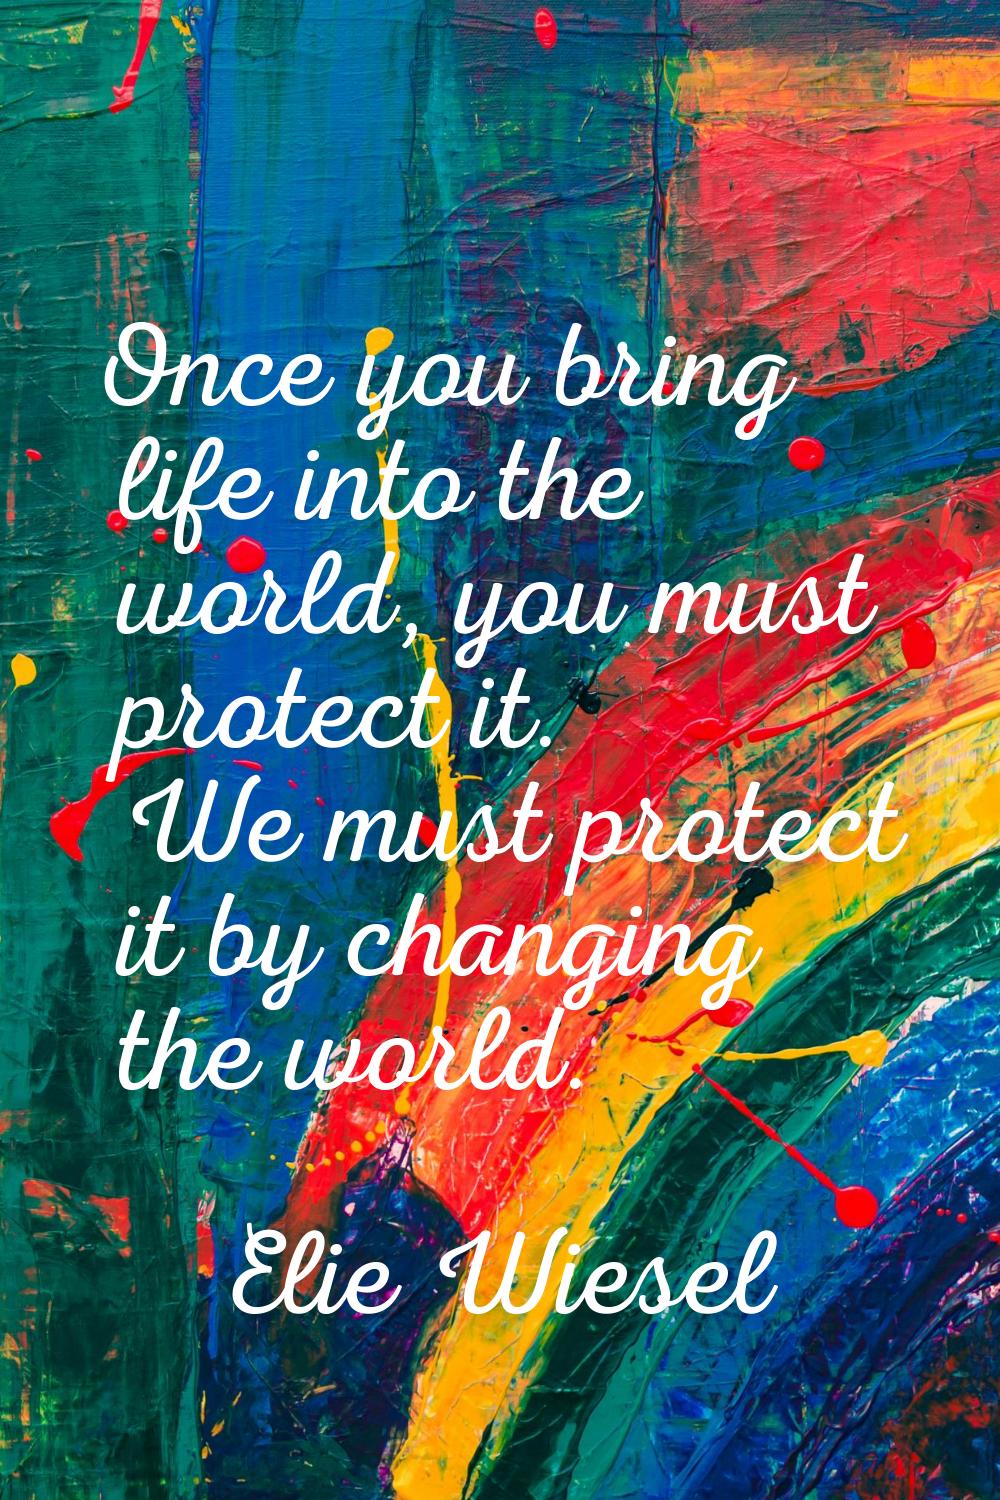 Once you bring life into the world, you must protect it. We must protect it by changing the world.